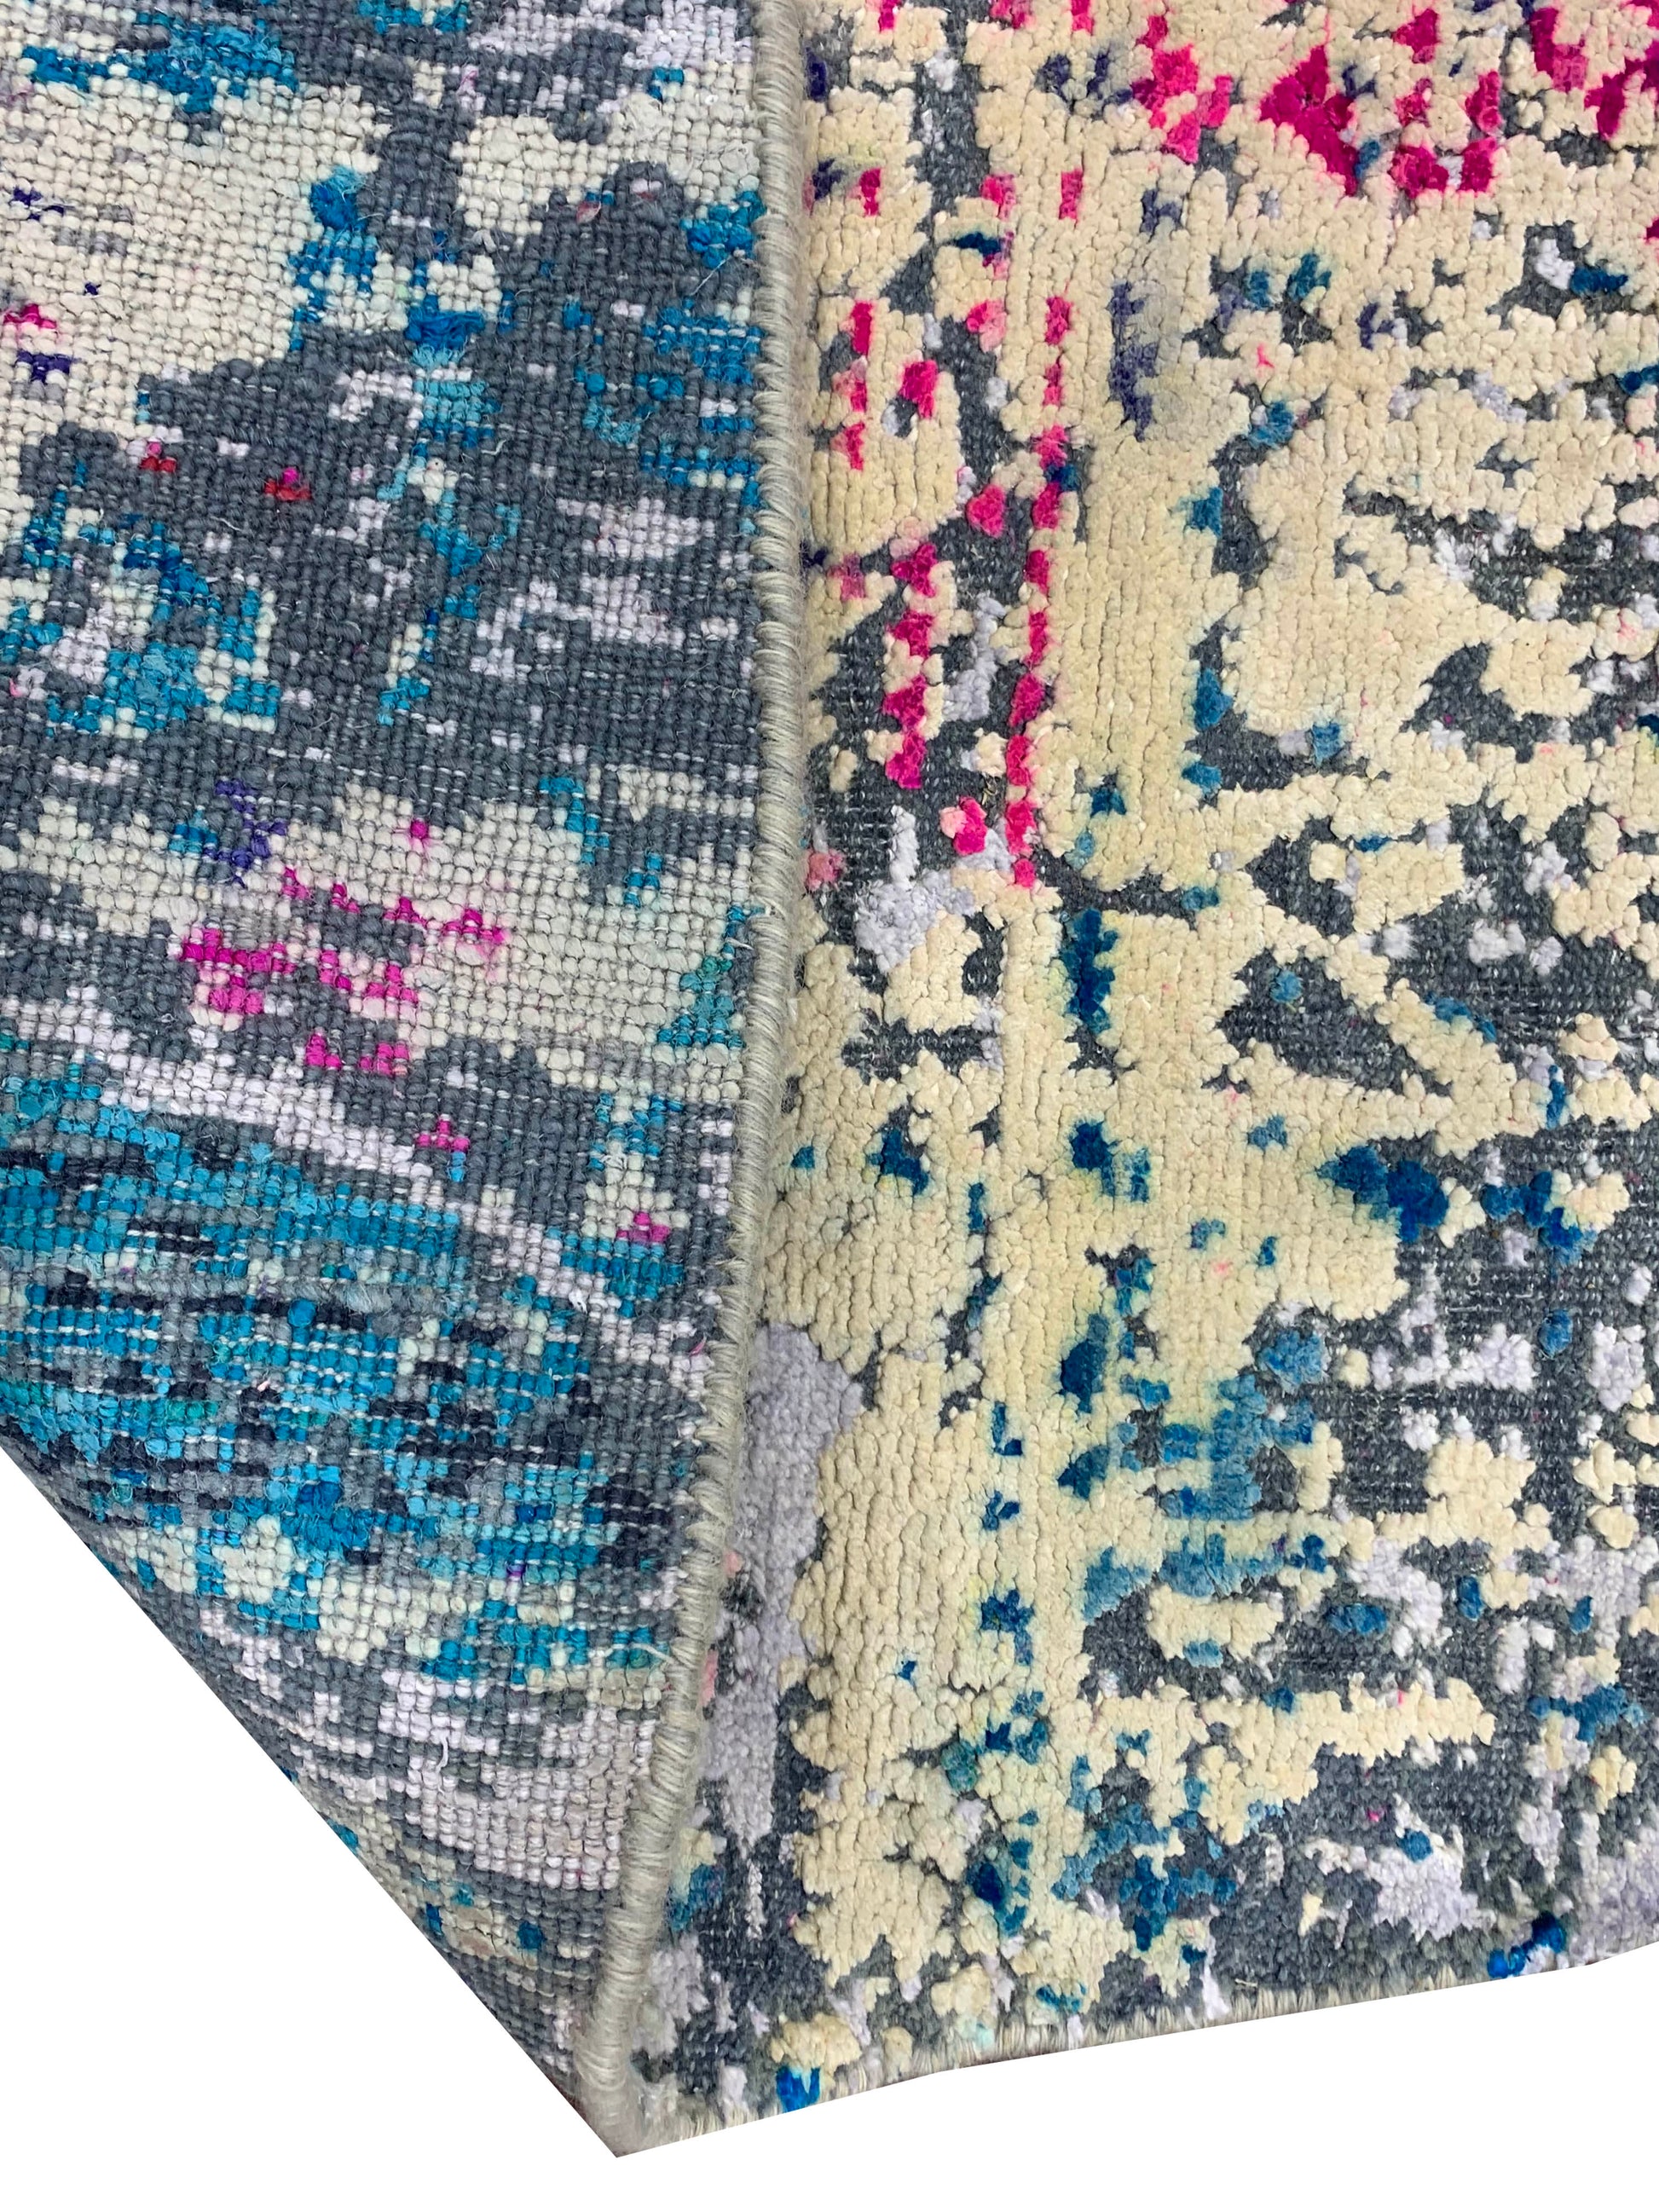 Get trendy with Blue, Ivory, Grey, and Pink Sari Silk and Wool Modern Handknotted Rond Rug - Modern Rugs available at Jaipur Oriental Rugs. Grab yours for $5699.00 today!